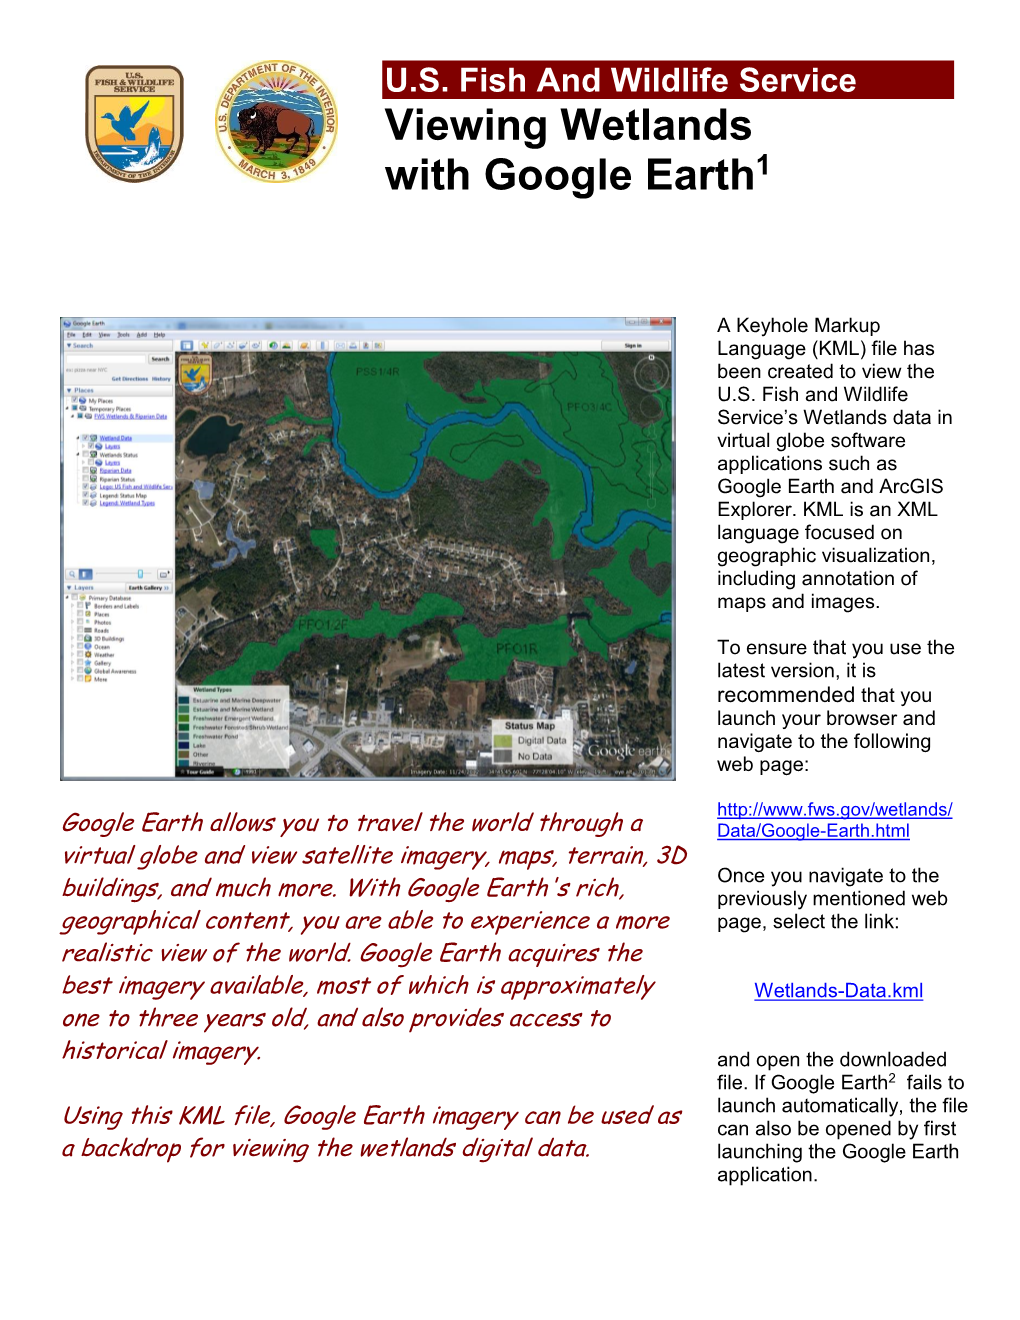 Viewing Wetlands with Google Earth1